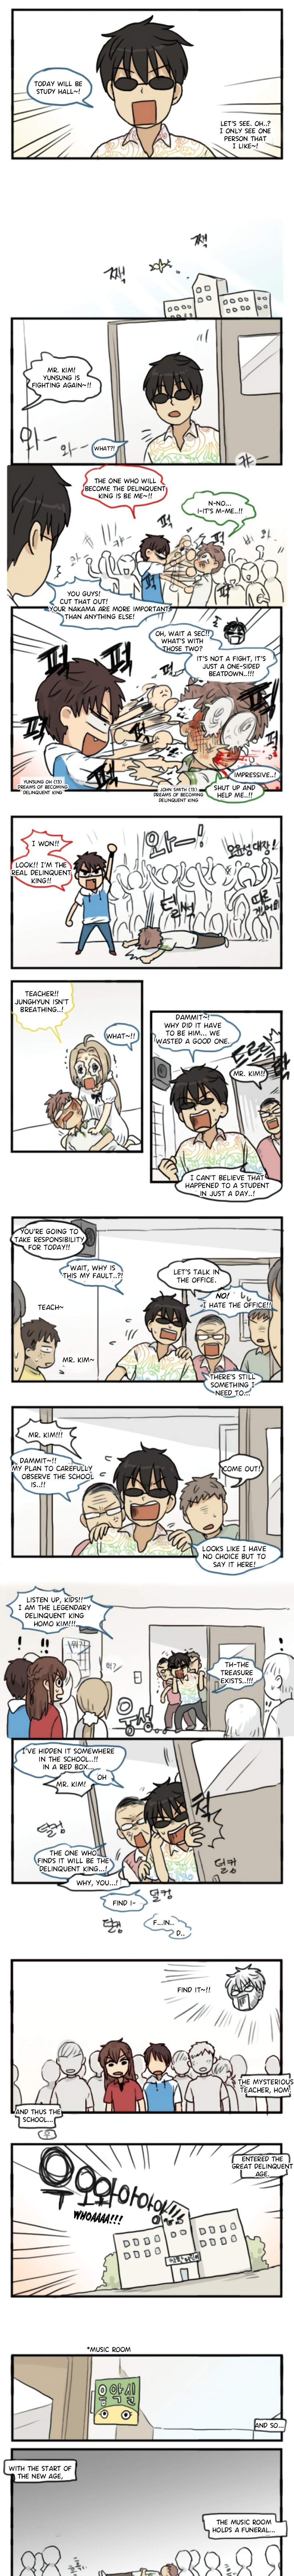 Welcome To Room #305! - Page 2